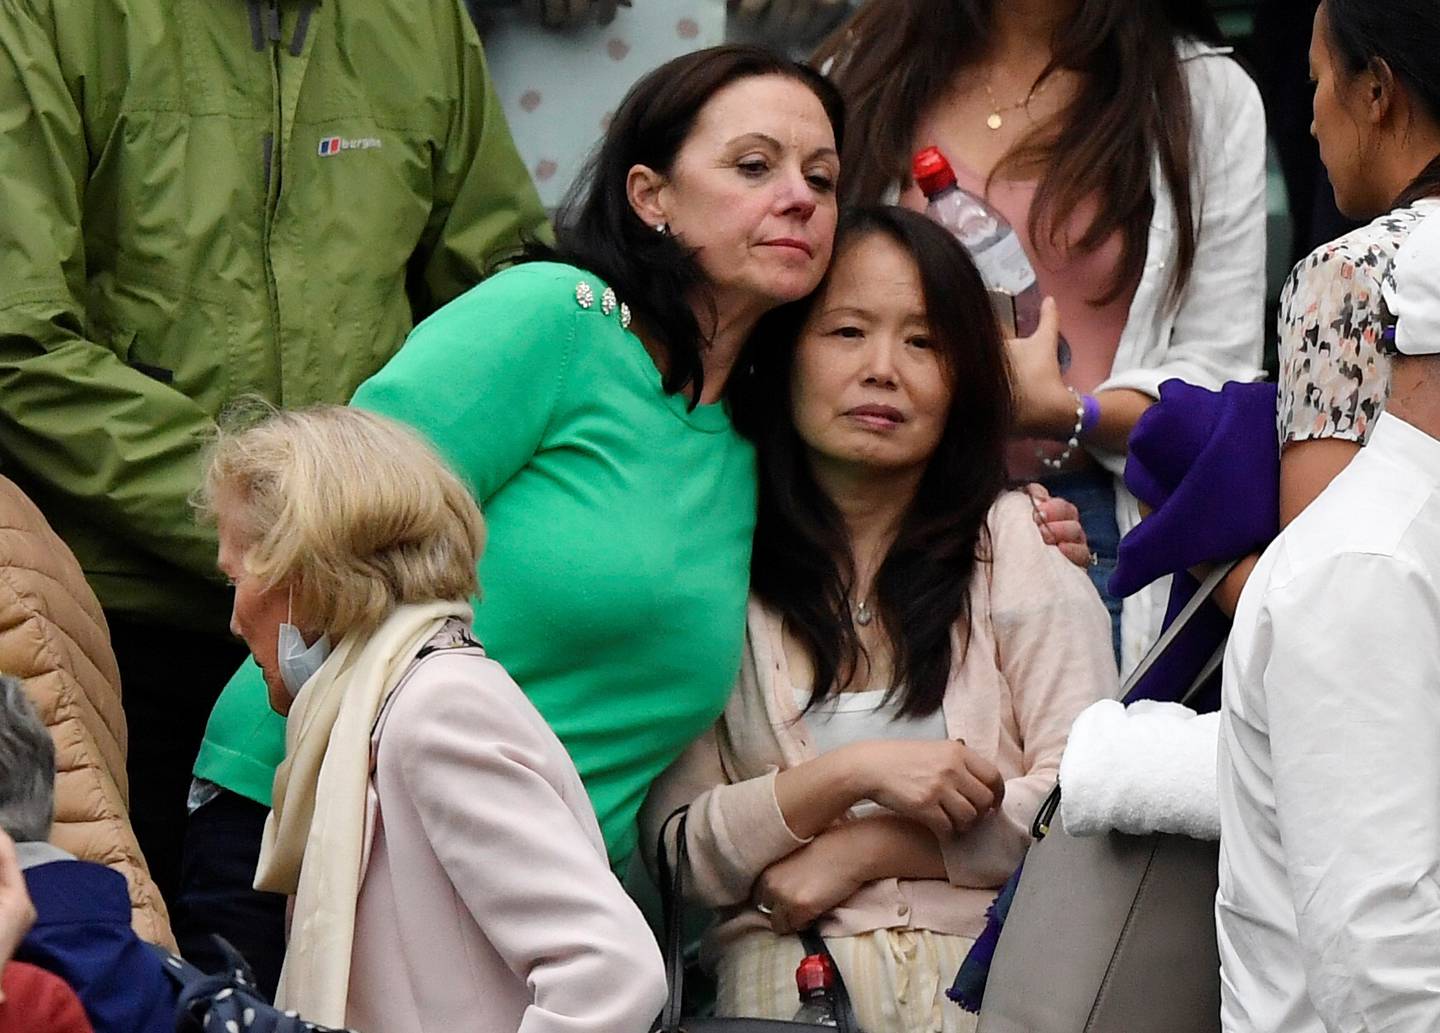 Renee Raducanu, centre, mother of Britain's Emma Raducanu, leaves after Raducanu retired from her fourth round match against Australia's Ajla Tomljanovic on July 5, at their women's singles fourth round match at Wimbledon, London. Reuters